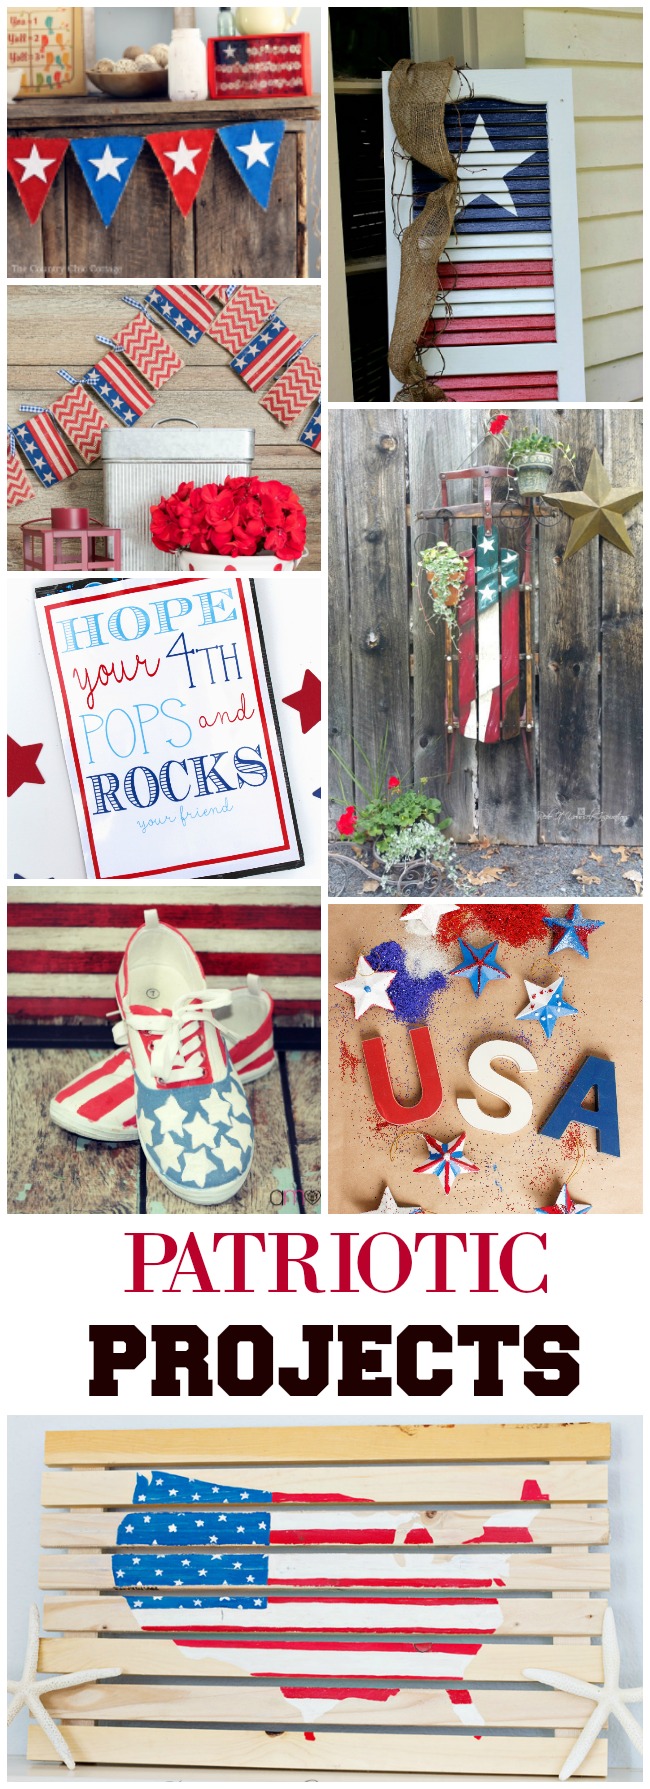 You will love these fun and inspiring Patriotic Projects great for Fourth of July or Memorial Day